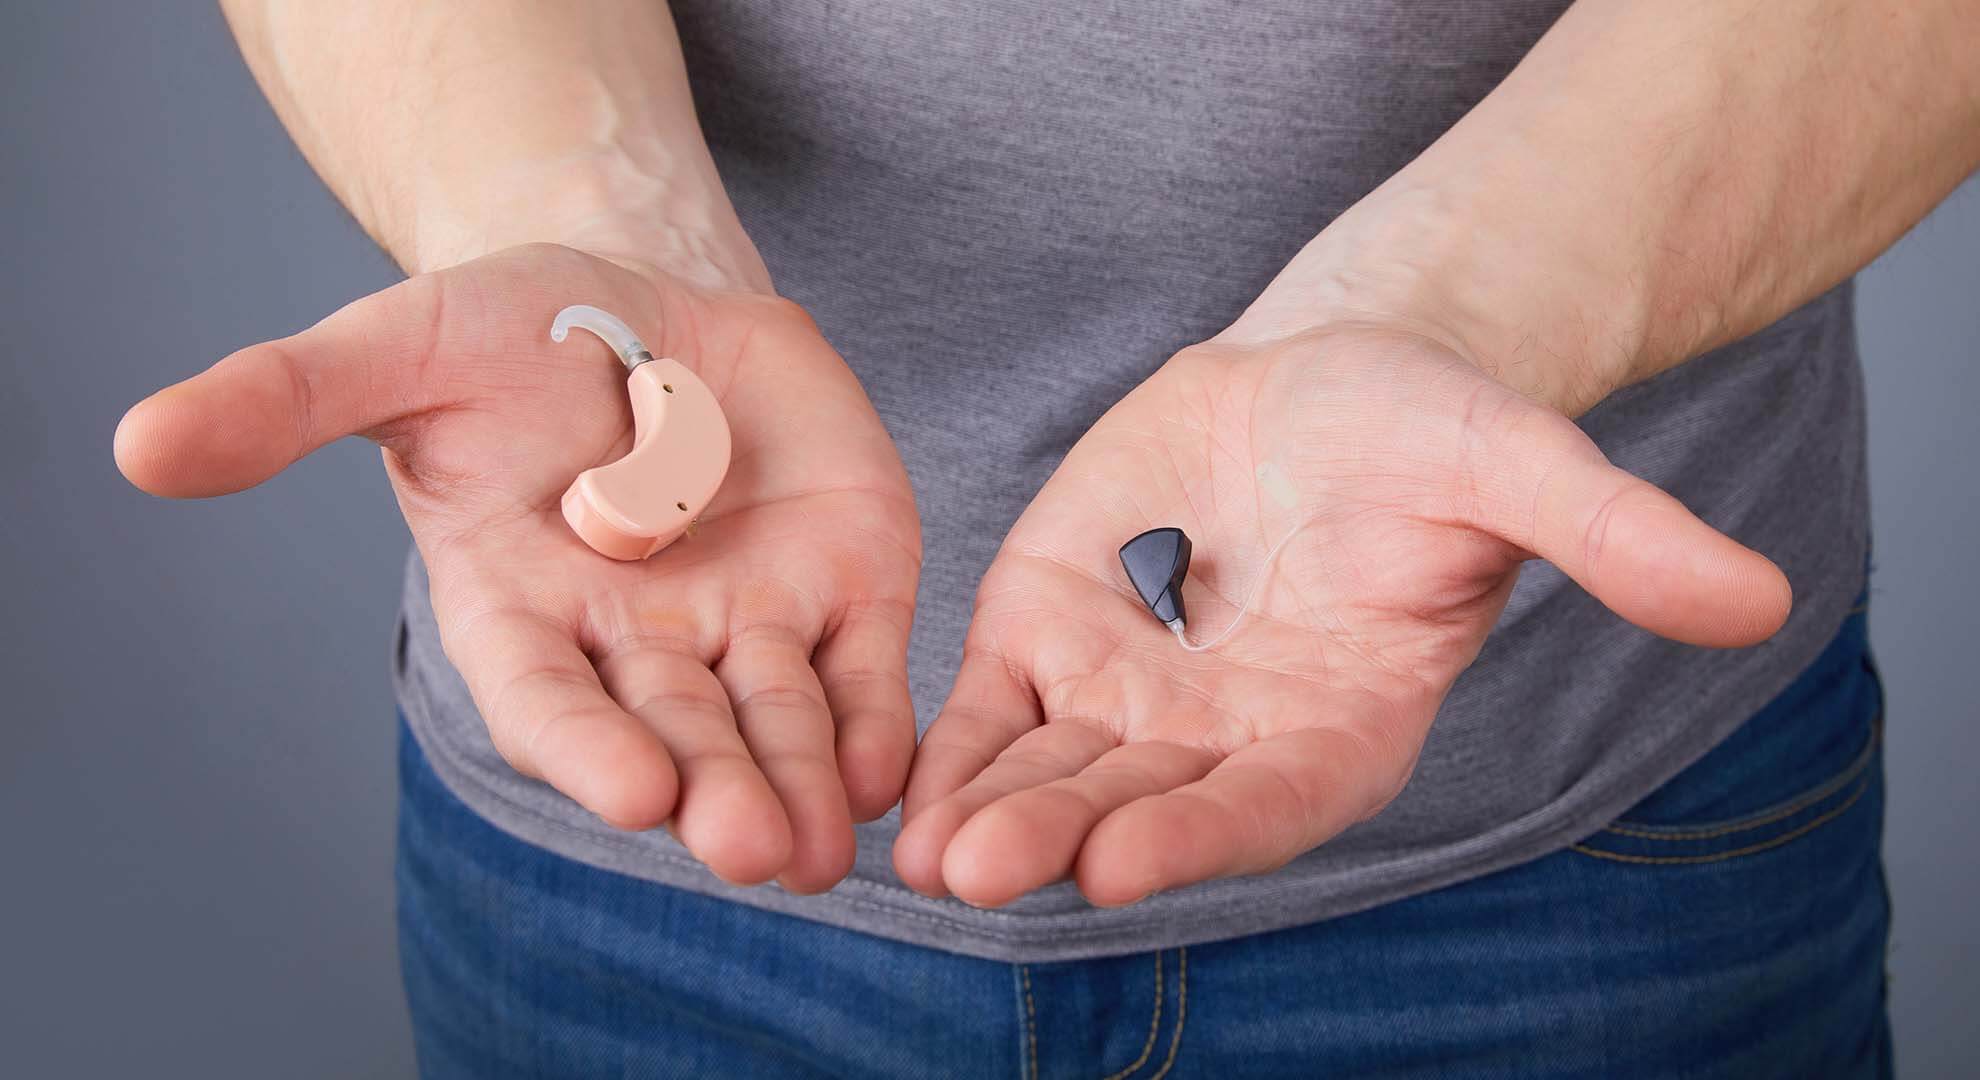 A person holding out different hearing aids on their hands